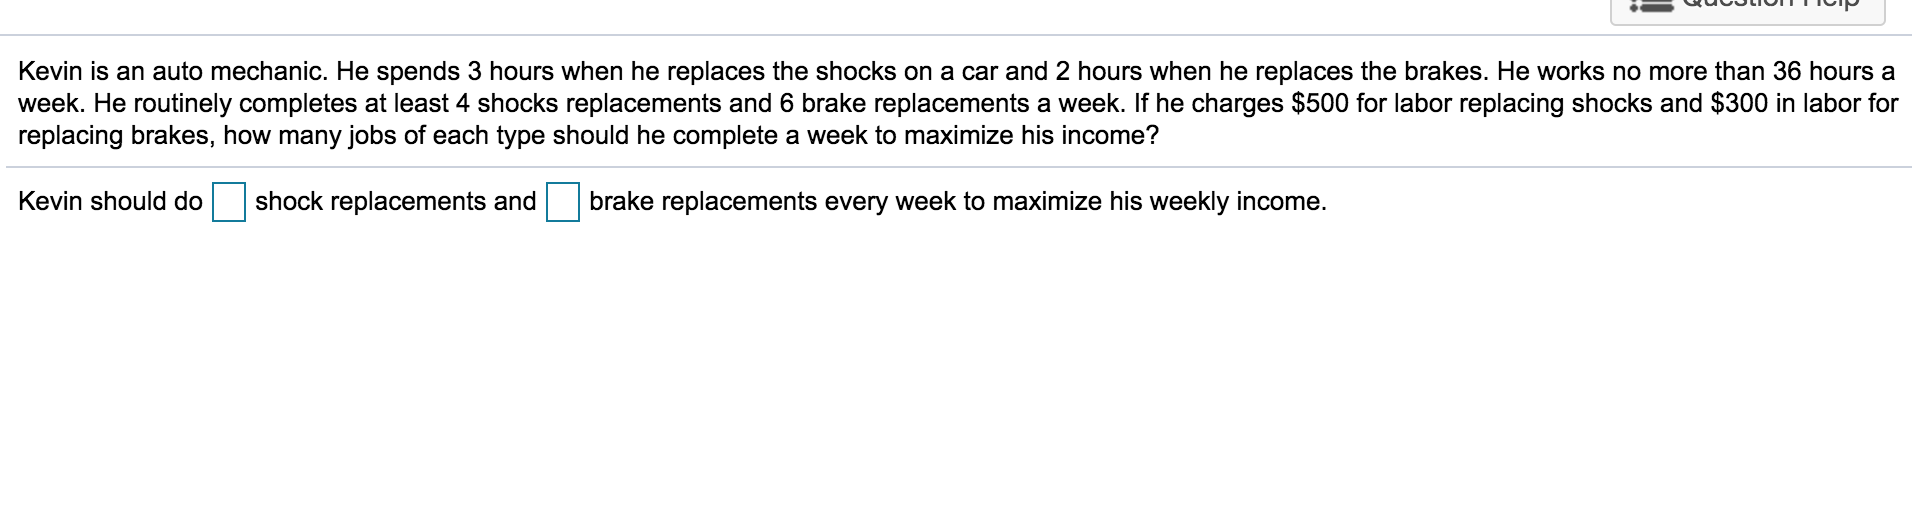 Kevin is an auto mechanic. He spends 3 hours when he replaces the shocks on a car and 2 hours when he replaces the brakes. He works no more than 36 hours a
week. He routinely completes at least 4 shocks replacements and 6 brake replacements a week. If he charges $500 for labor replacing shocks and $300 in labor for
replacing brakes, how many jobs of each type should he complete a week to maximize his income?
Kevin should do
shock replacements and
brake replacements every week to maximize his weekly income.
